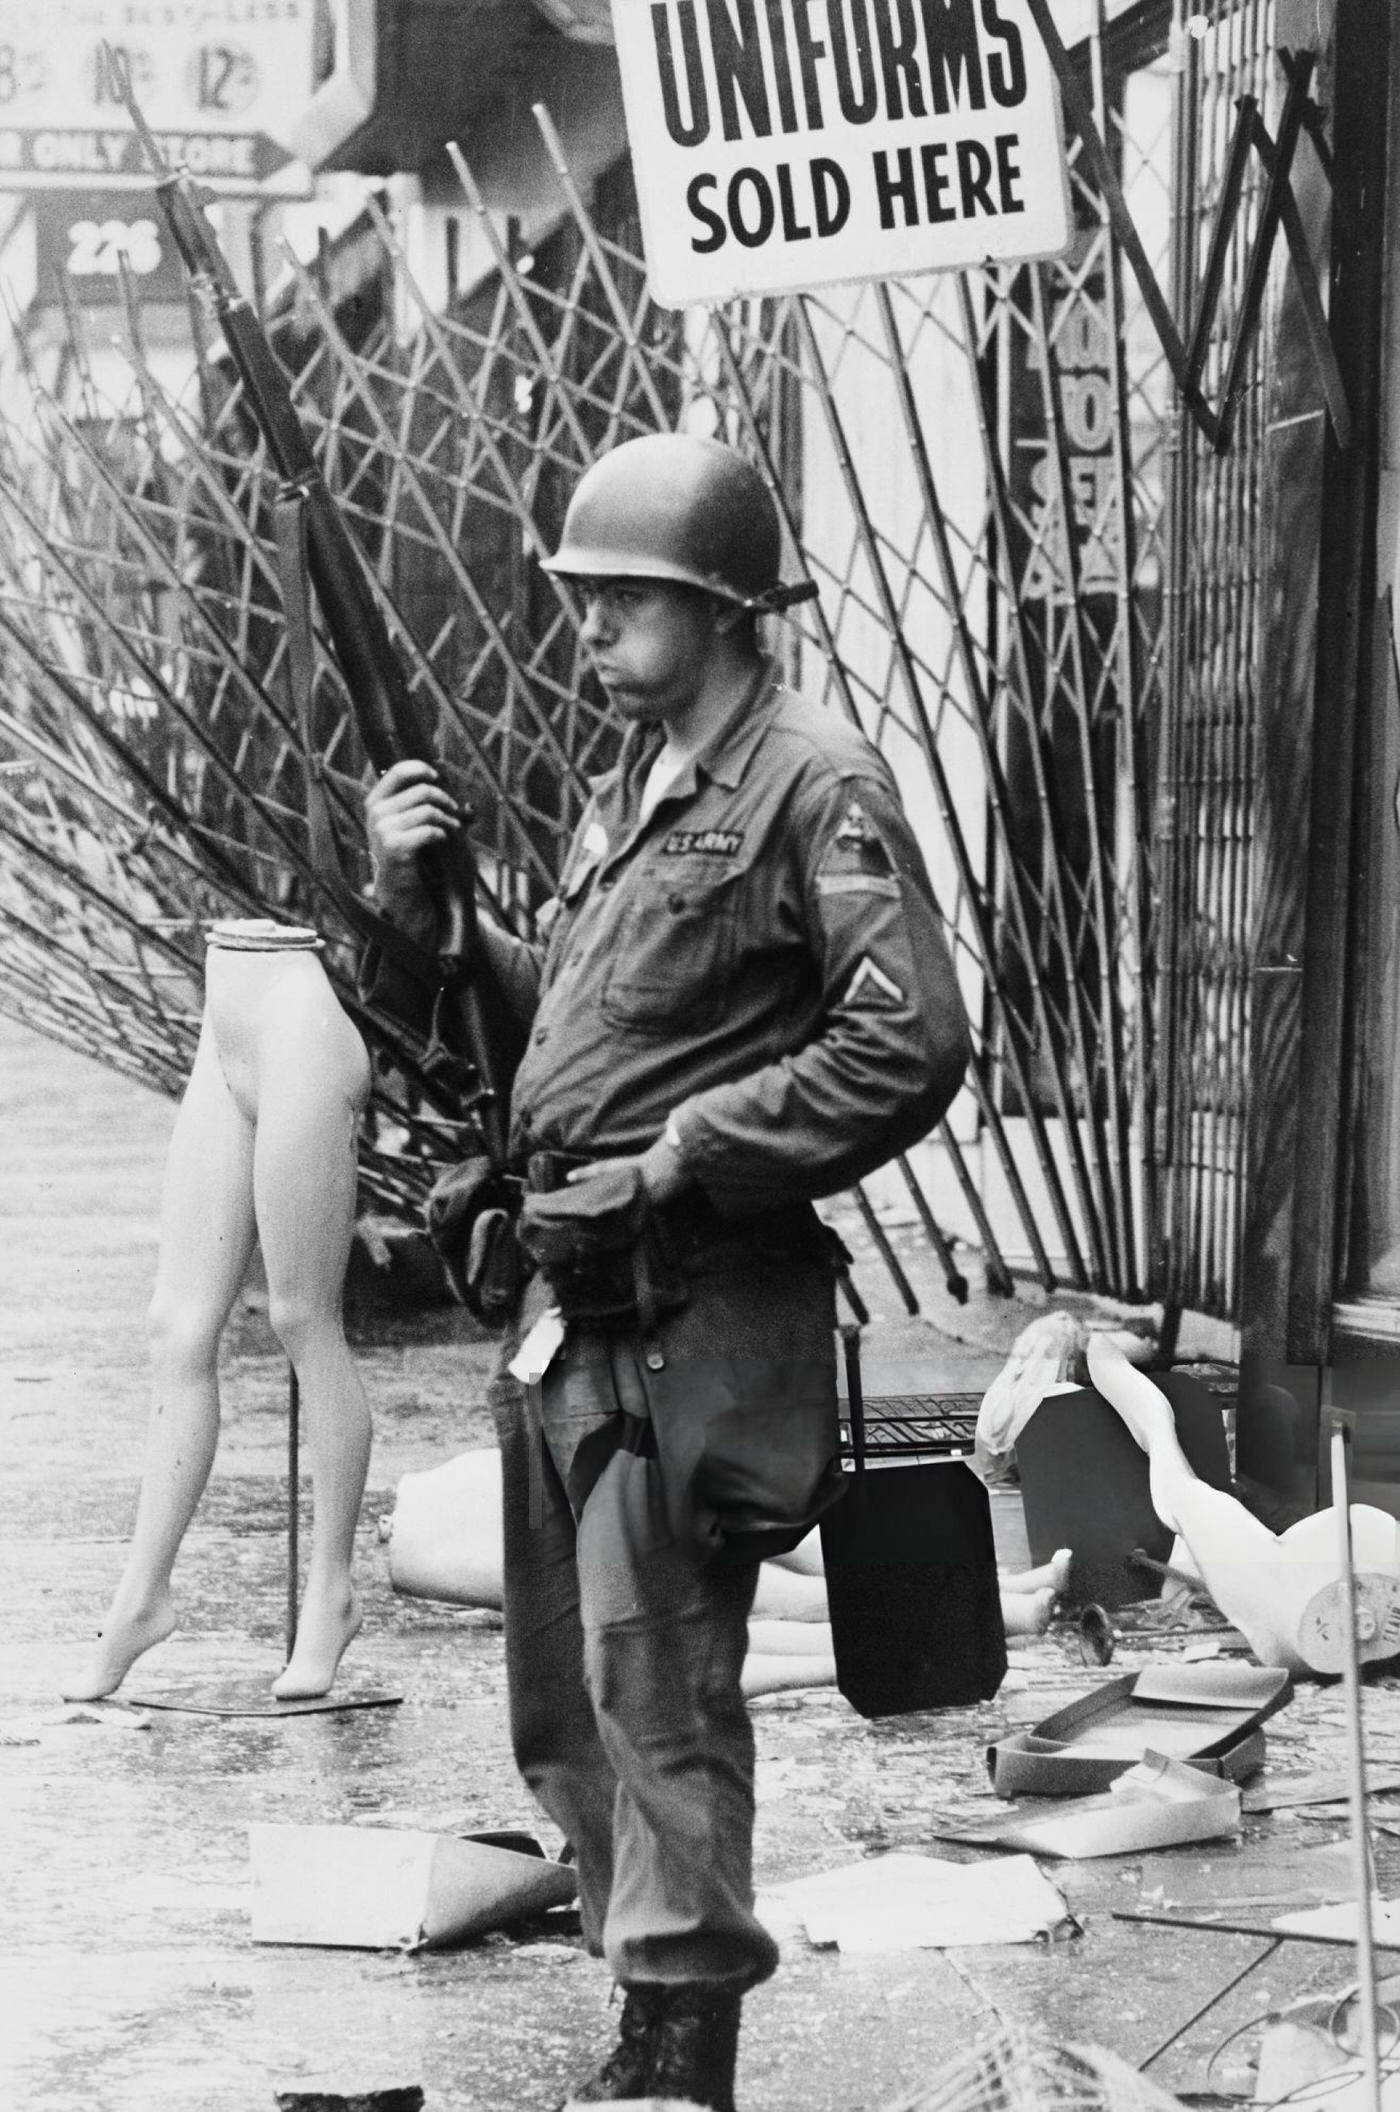 A soldier of the National Guard stands next to a mannequin's legs and a sign reading 'Uniforms Sold Here'